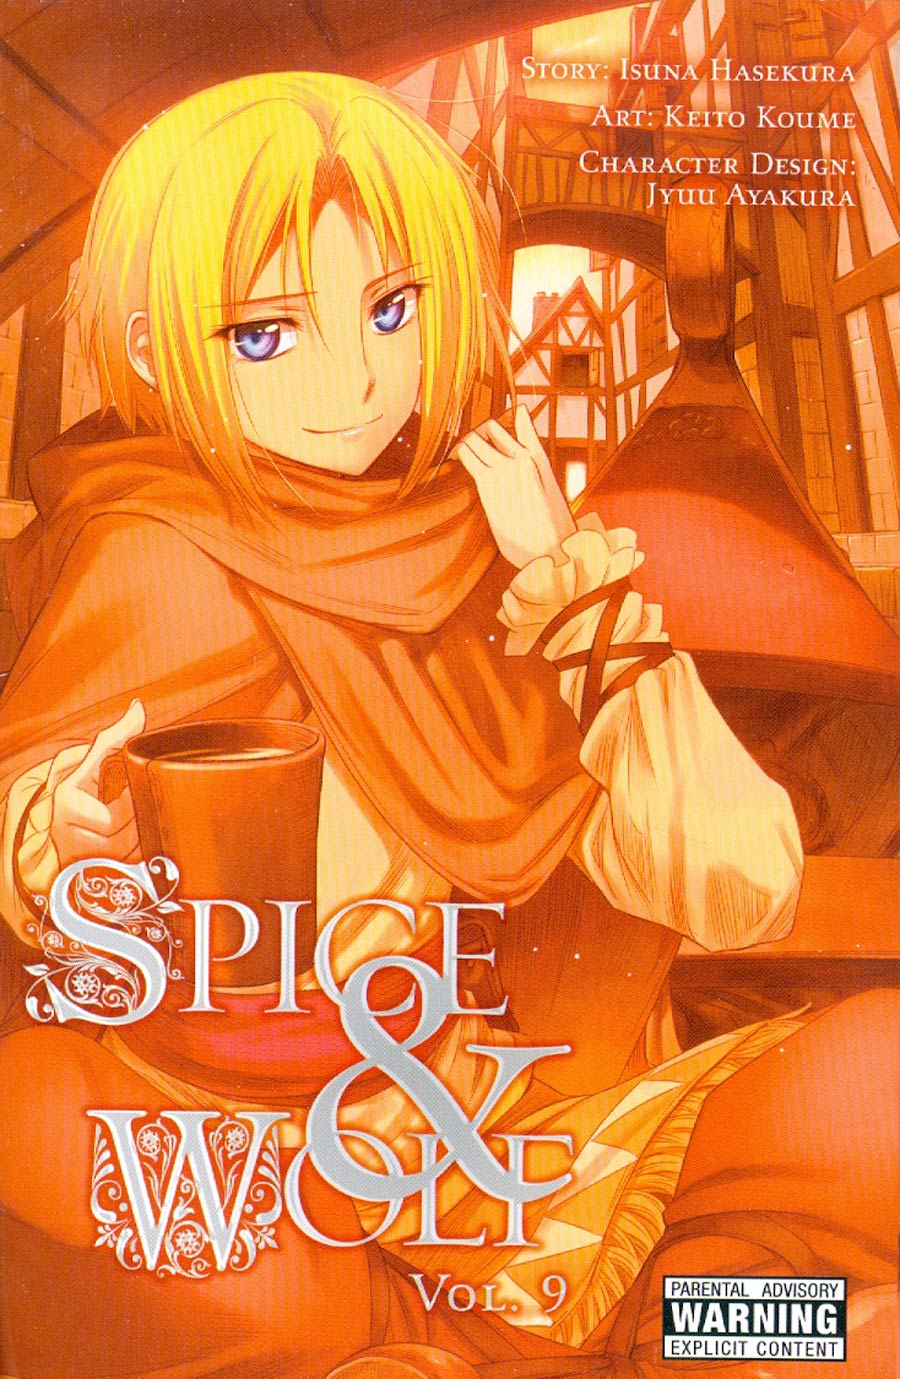 Spice & Wolf Vol 9 GN